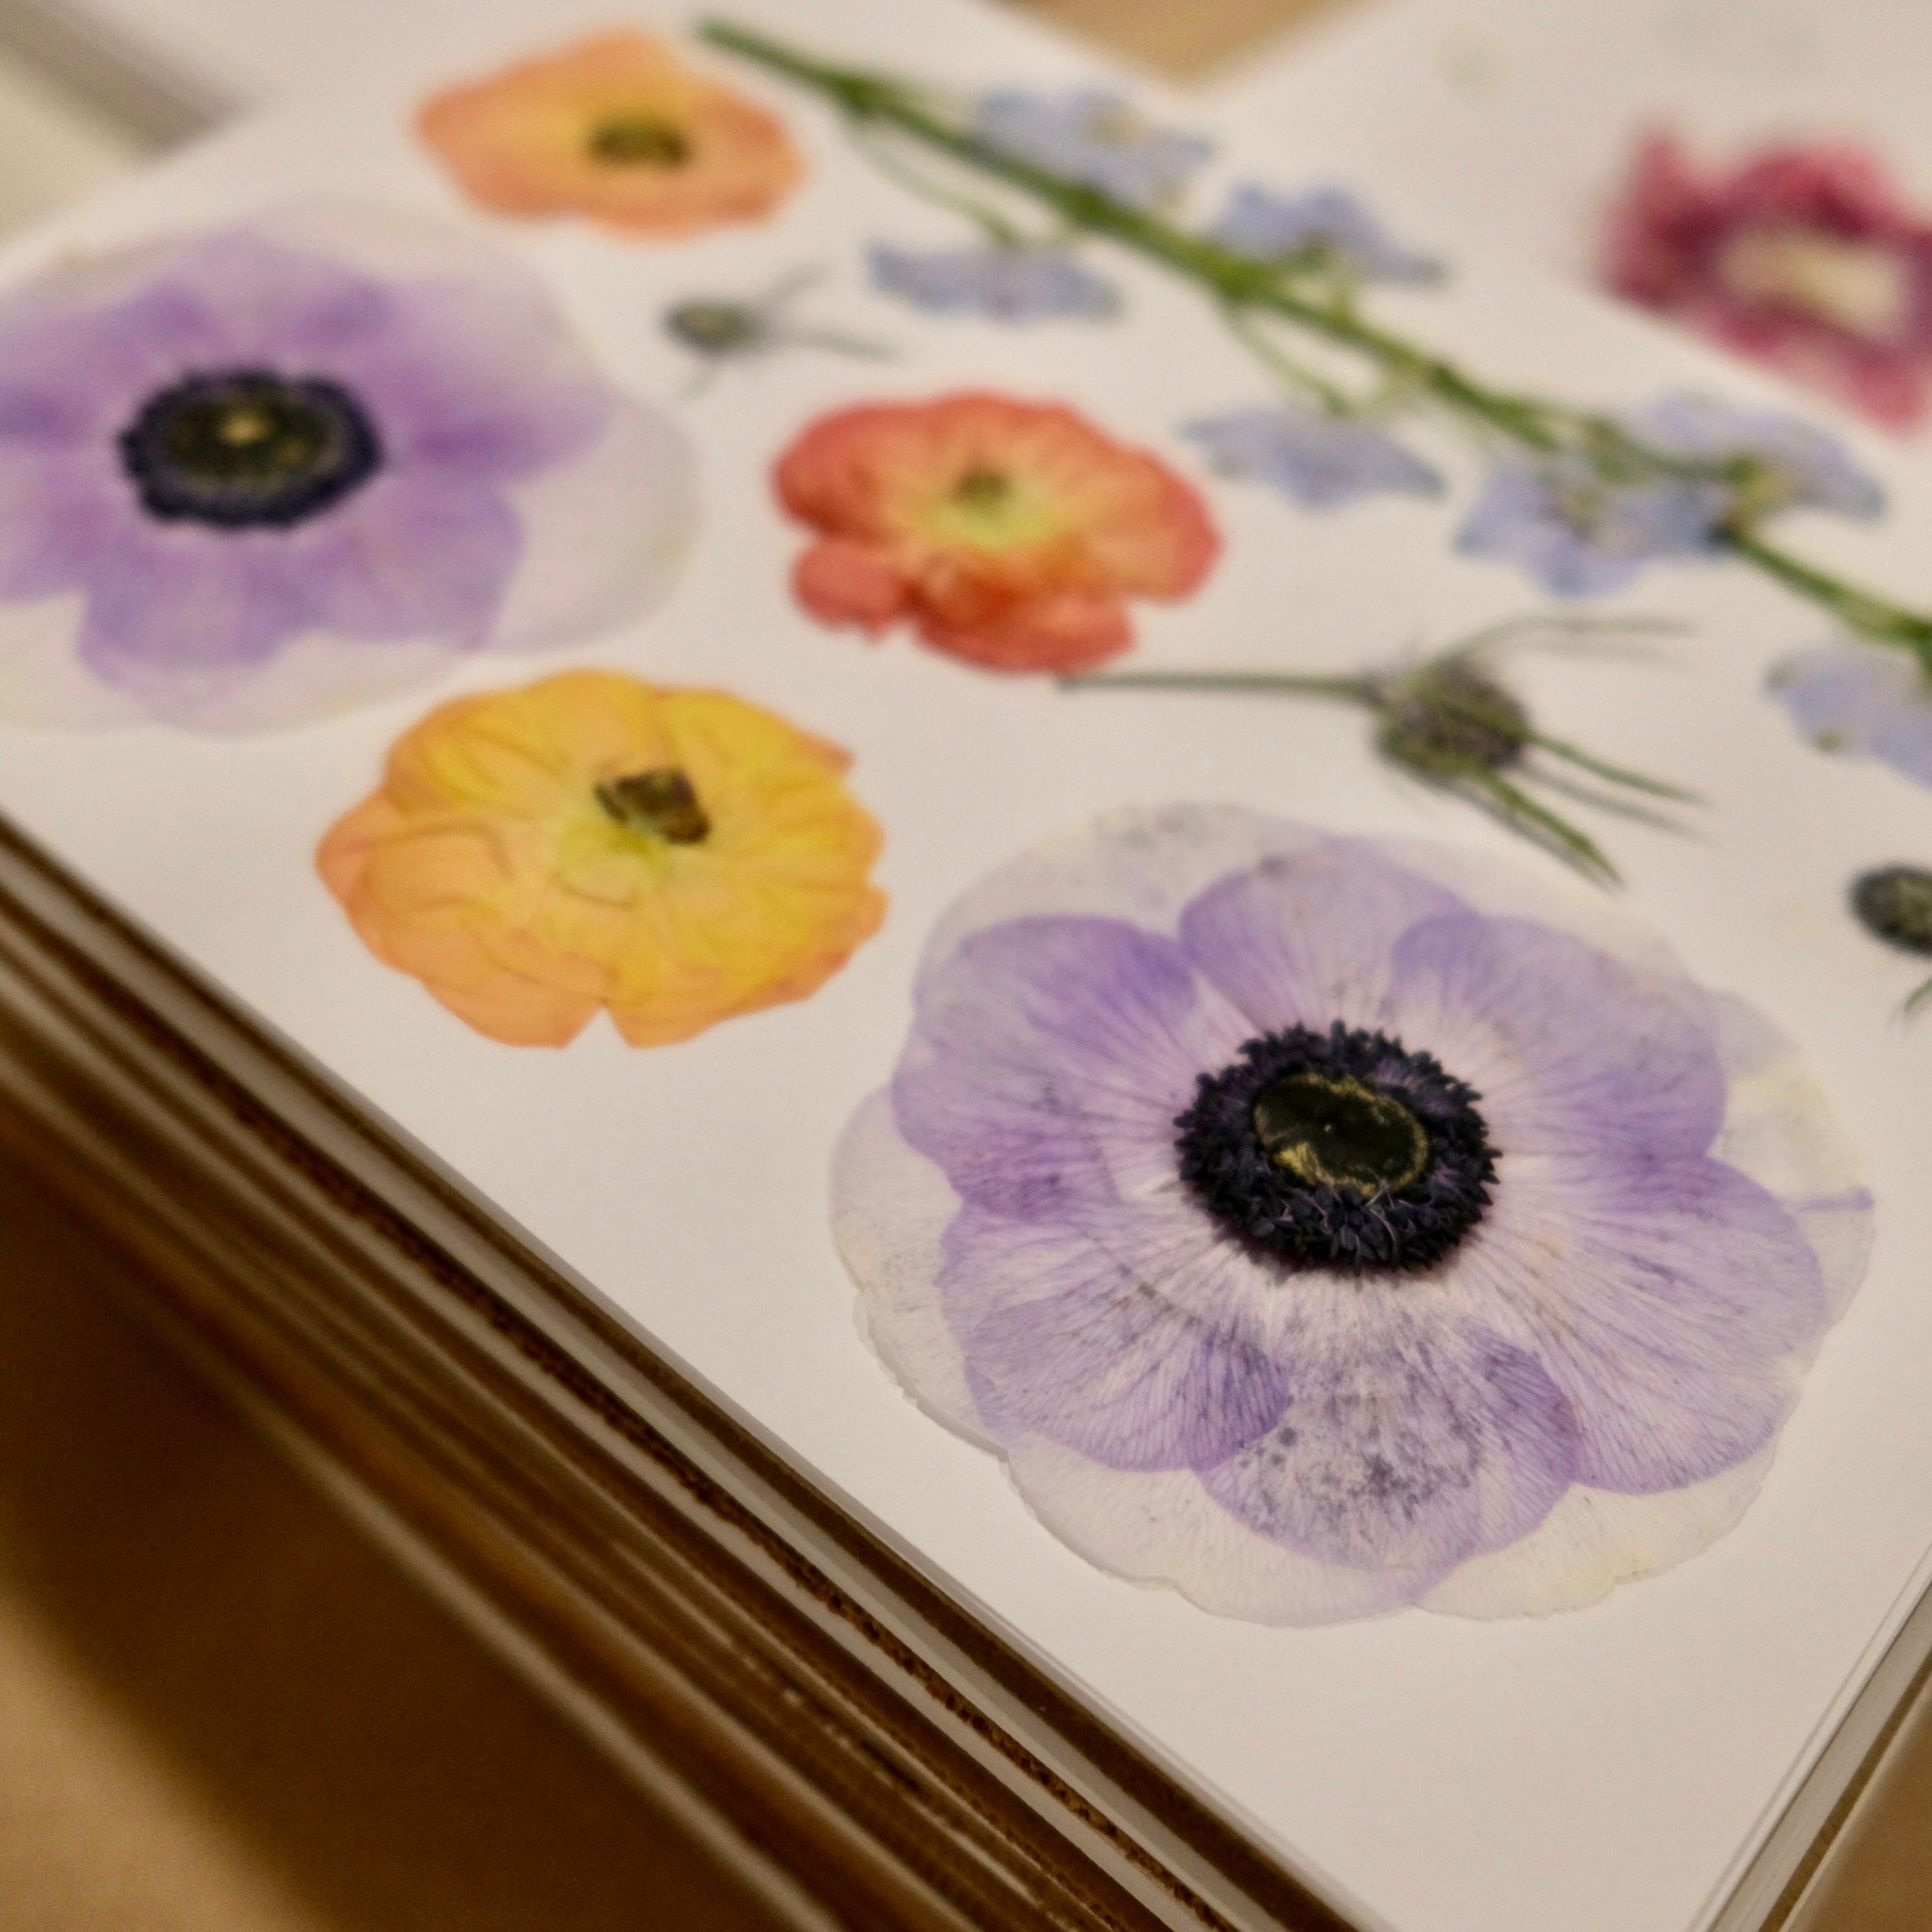 A page in our flower press with pressed sea holly, pressed anemone, pressed ranunculus, and pressed delphinium.